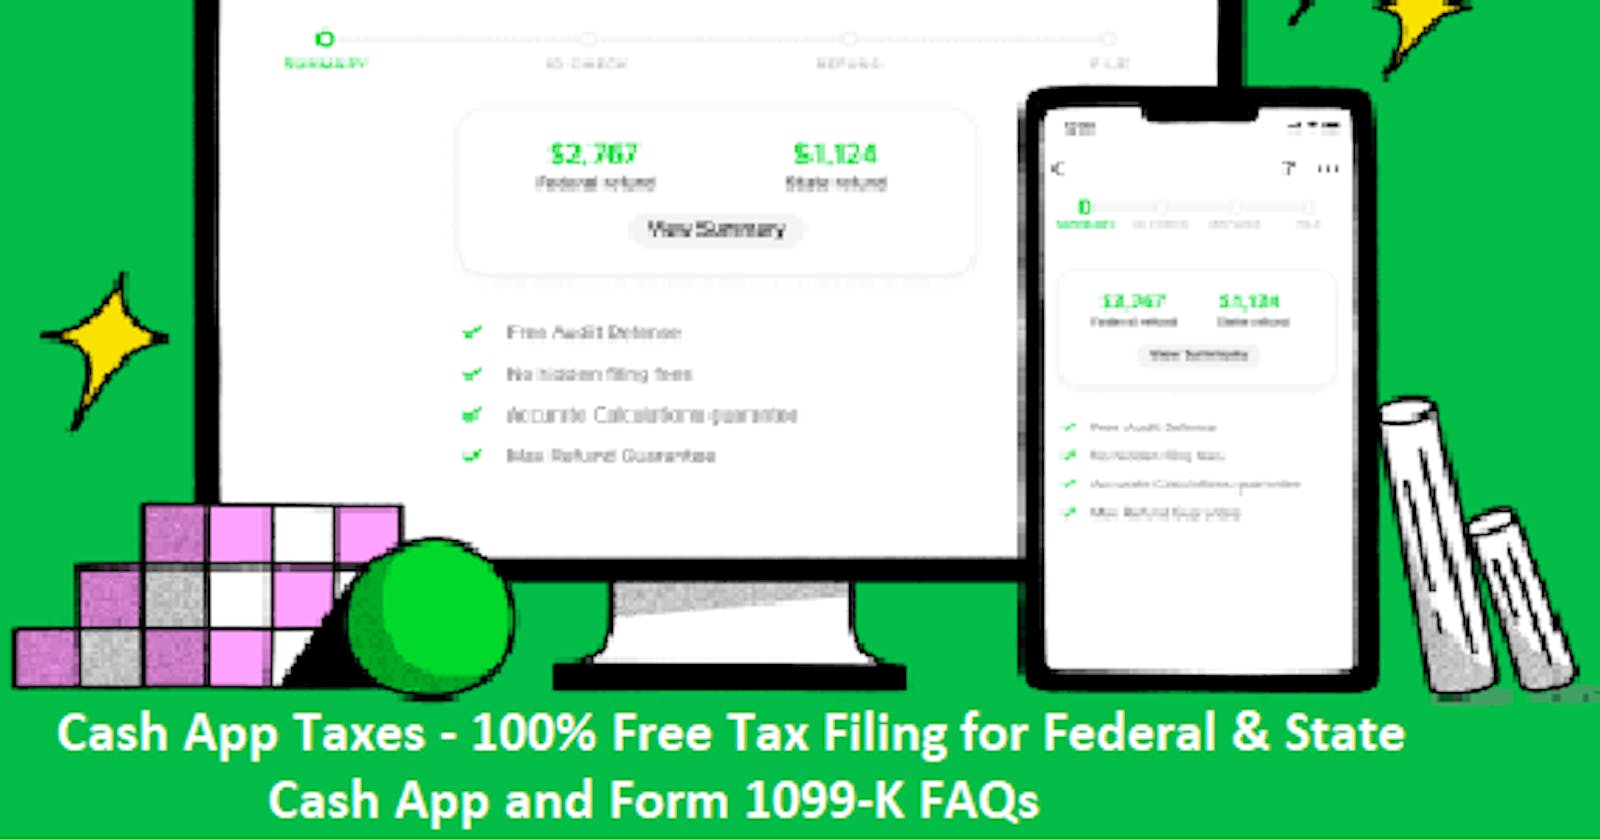 Cash App Taxes - 100% Free Tax Filing for Federal & State - Cash App and Form 1099-K FAQs